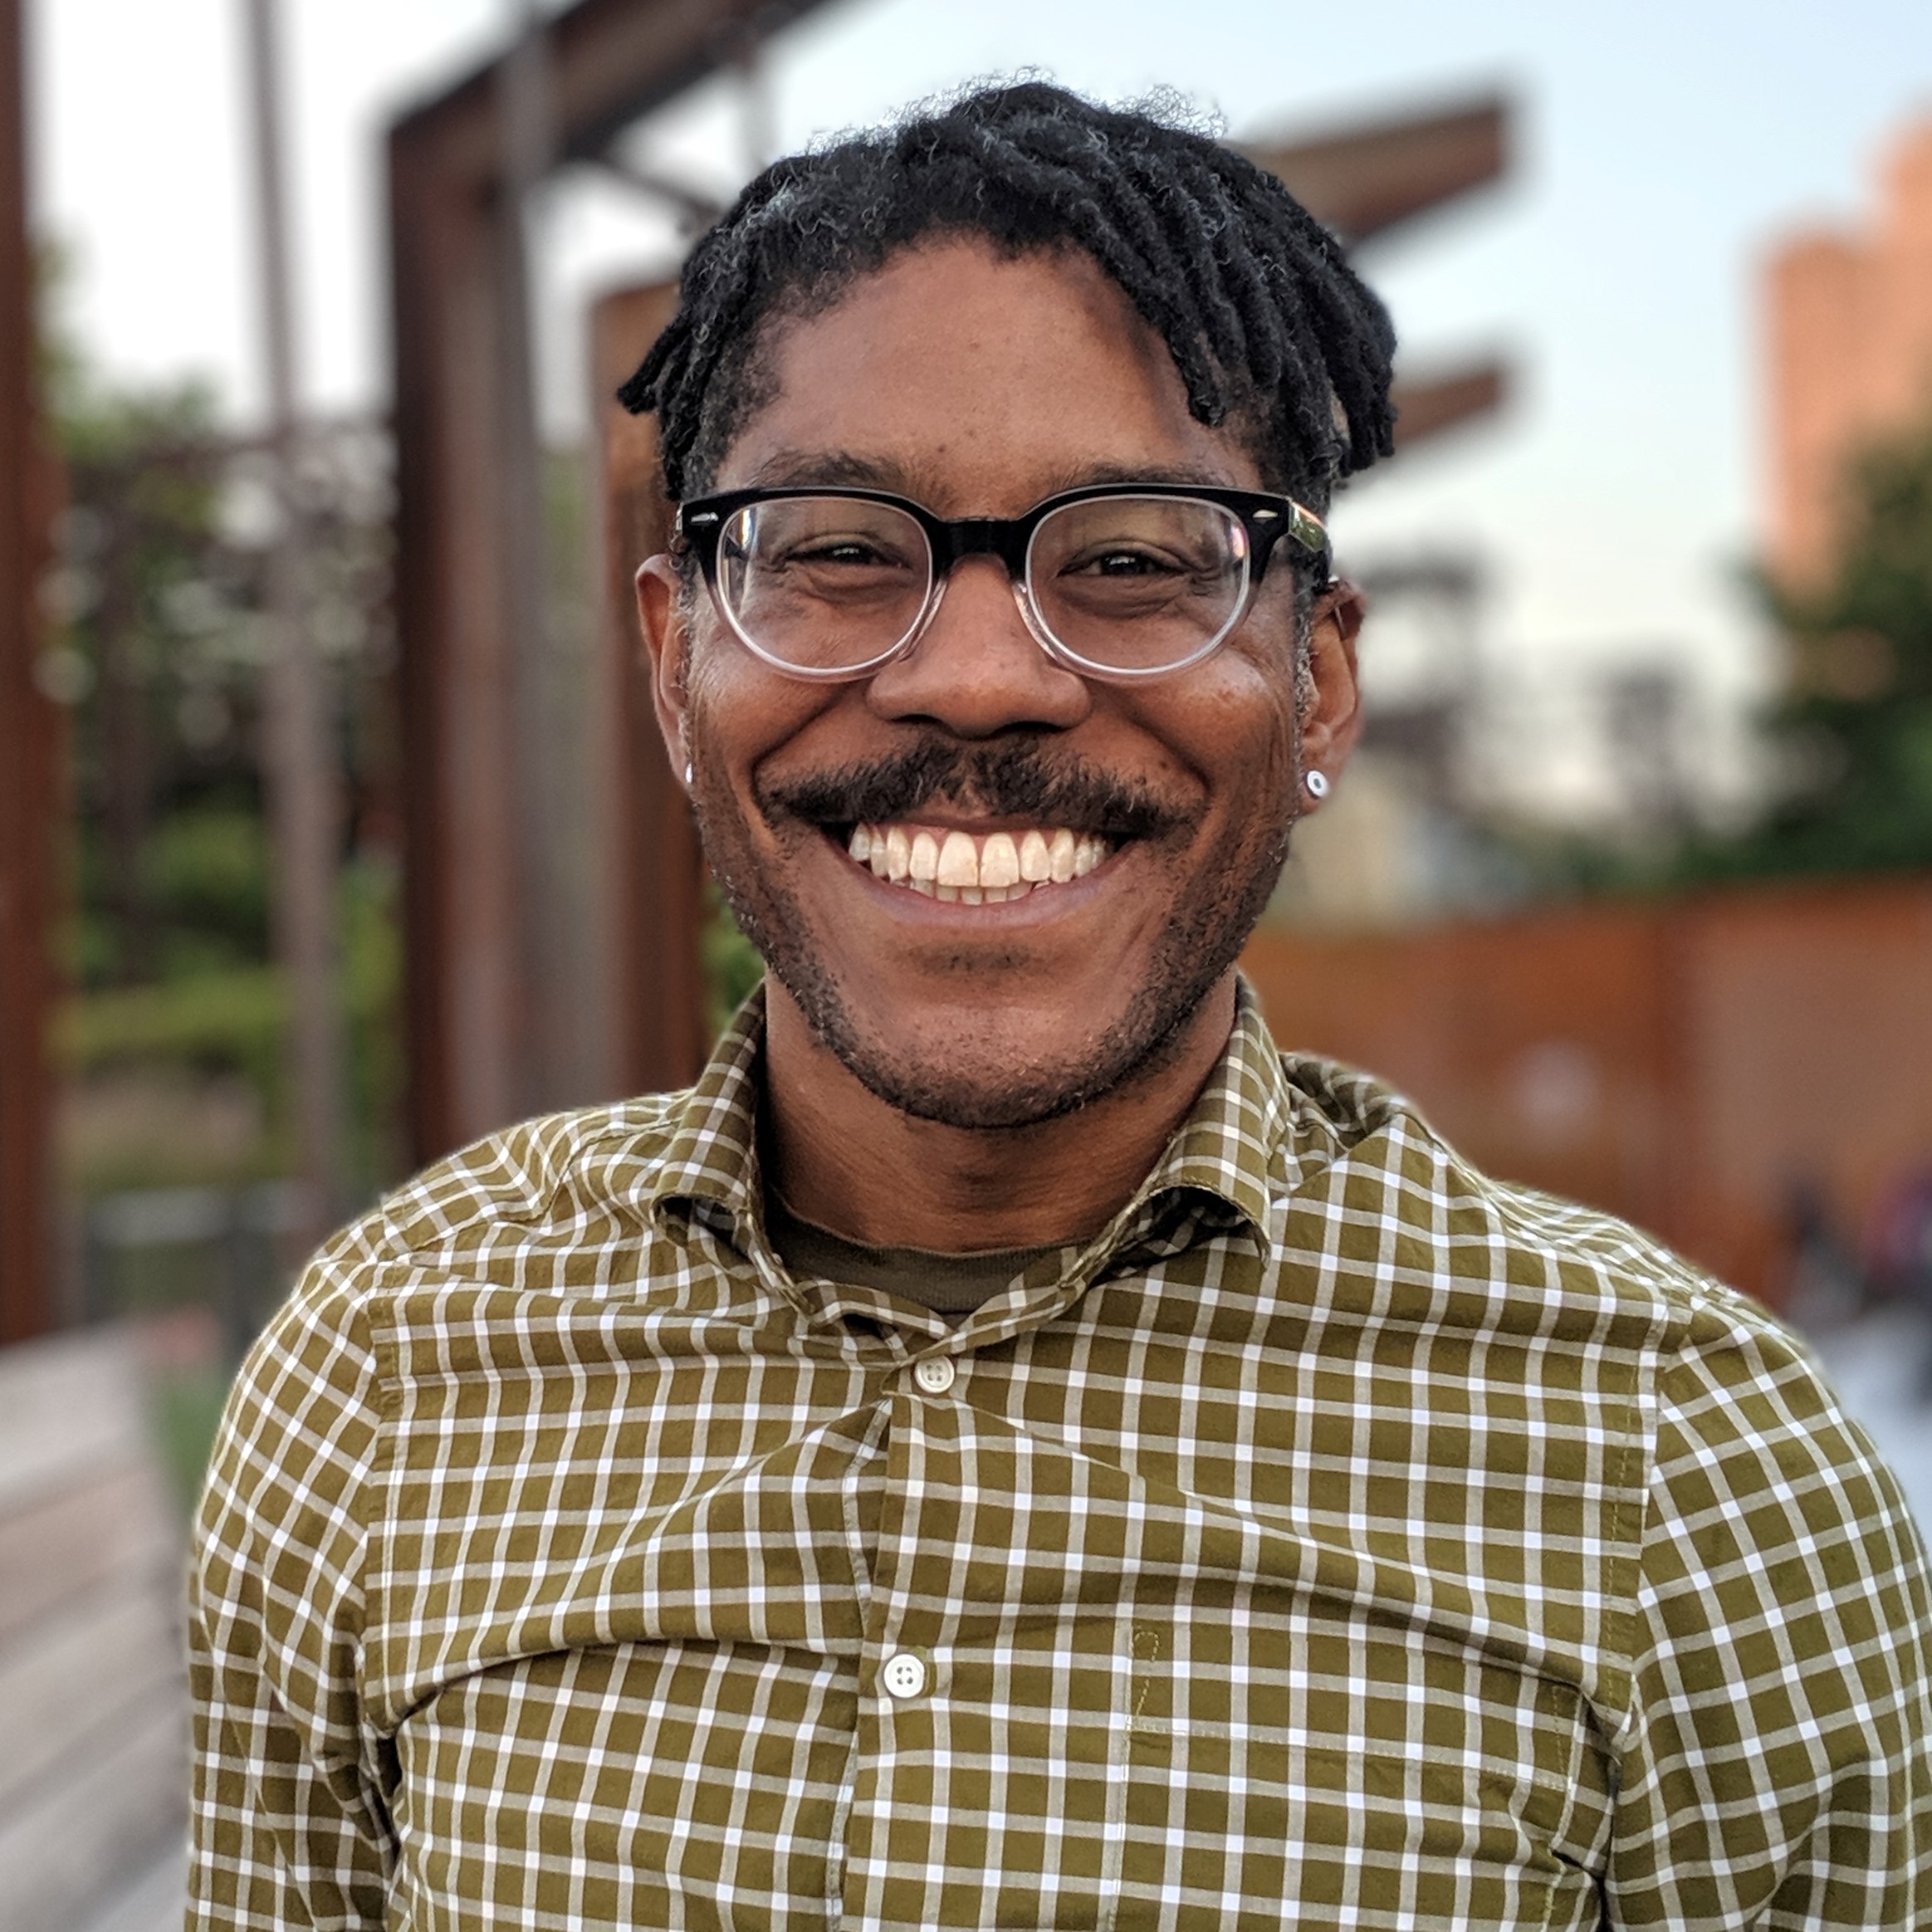 Portrait of a Black man with glasses, mustache and beaming smile wearing a plaid shirt.